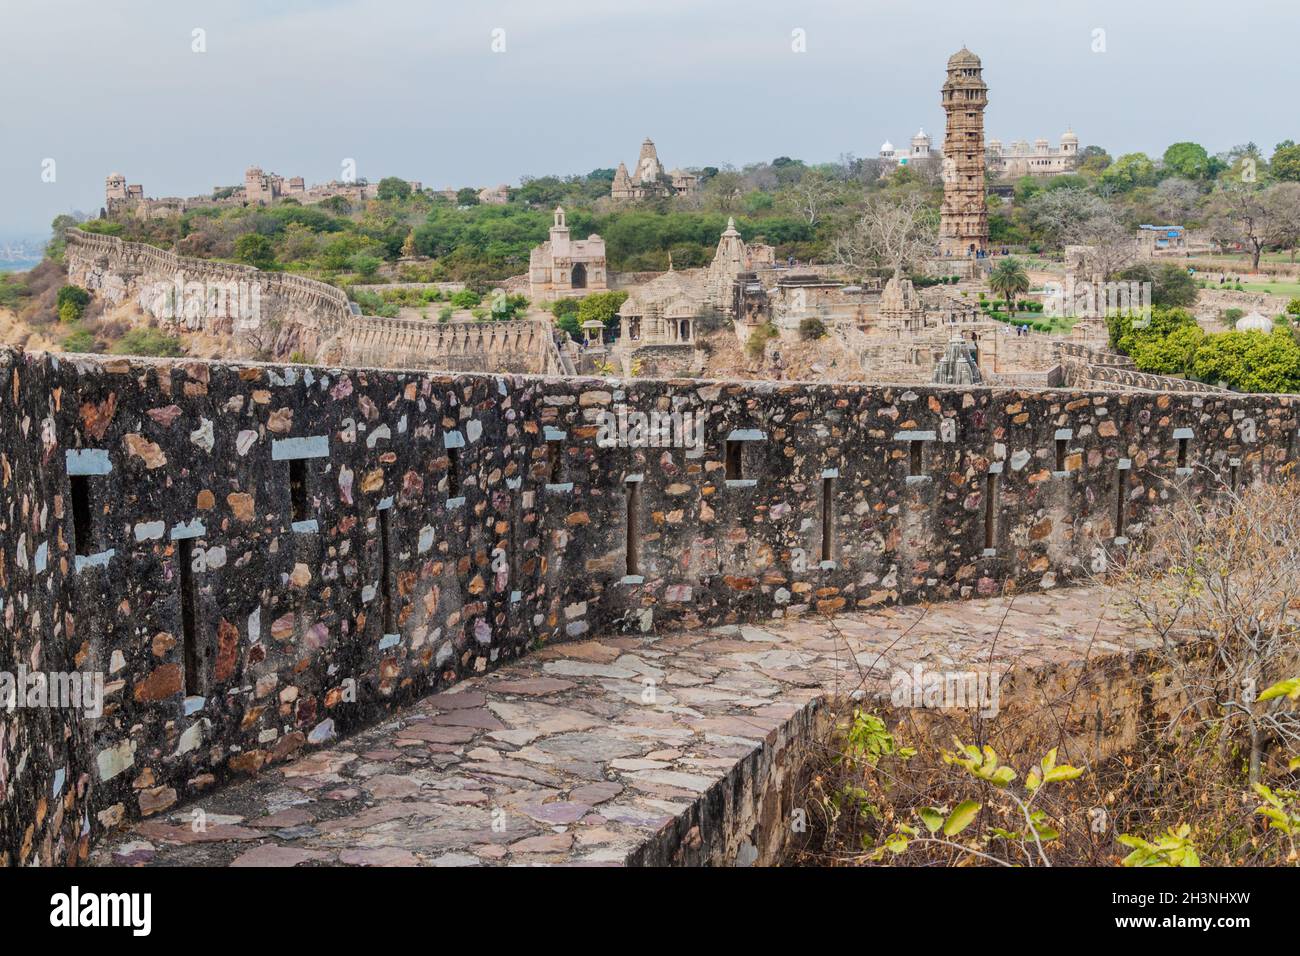 Wall of Chittor Fort in Chittorgarh, Rajasthan state, India Stock Photo